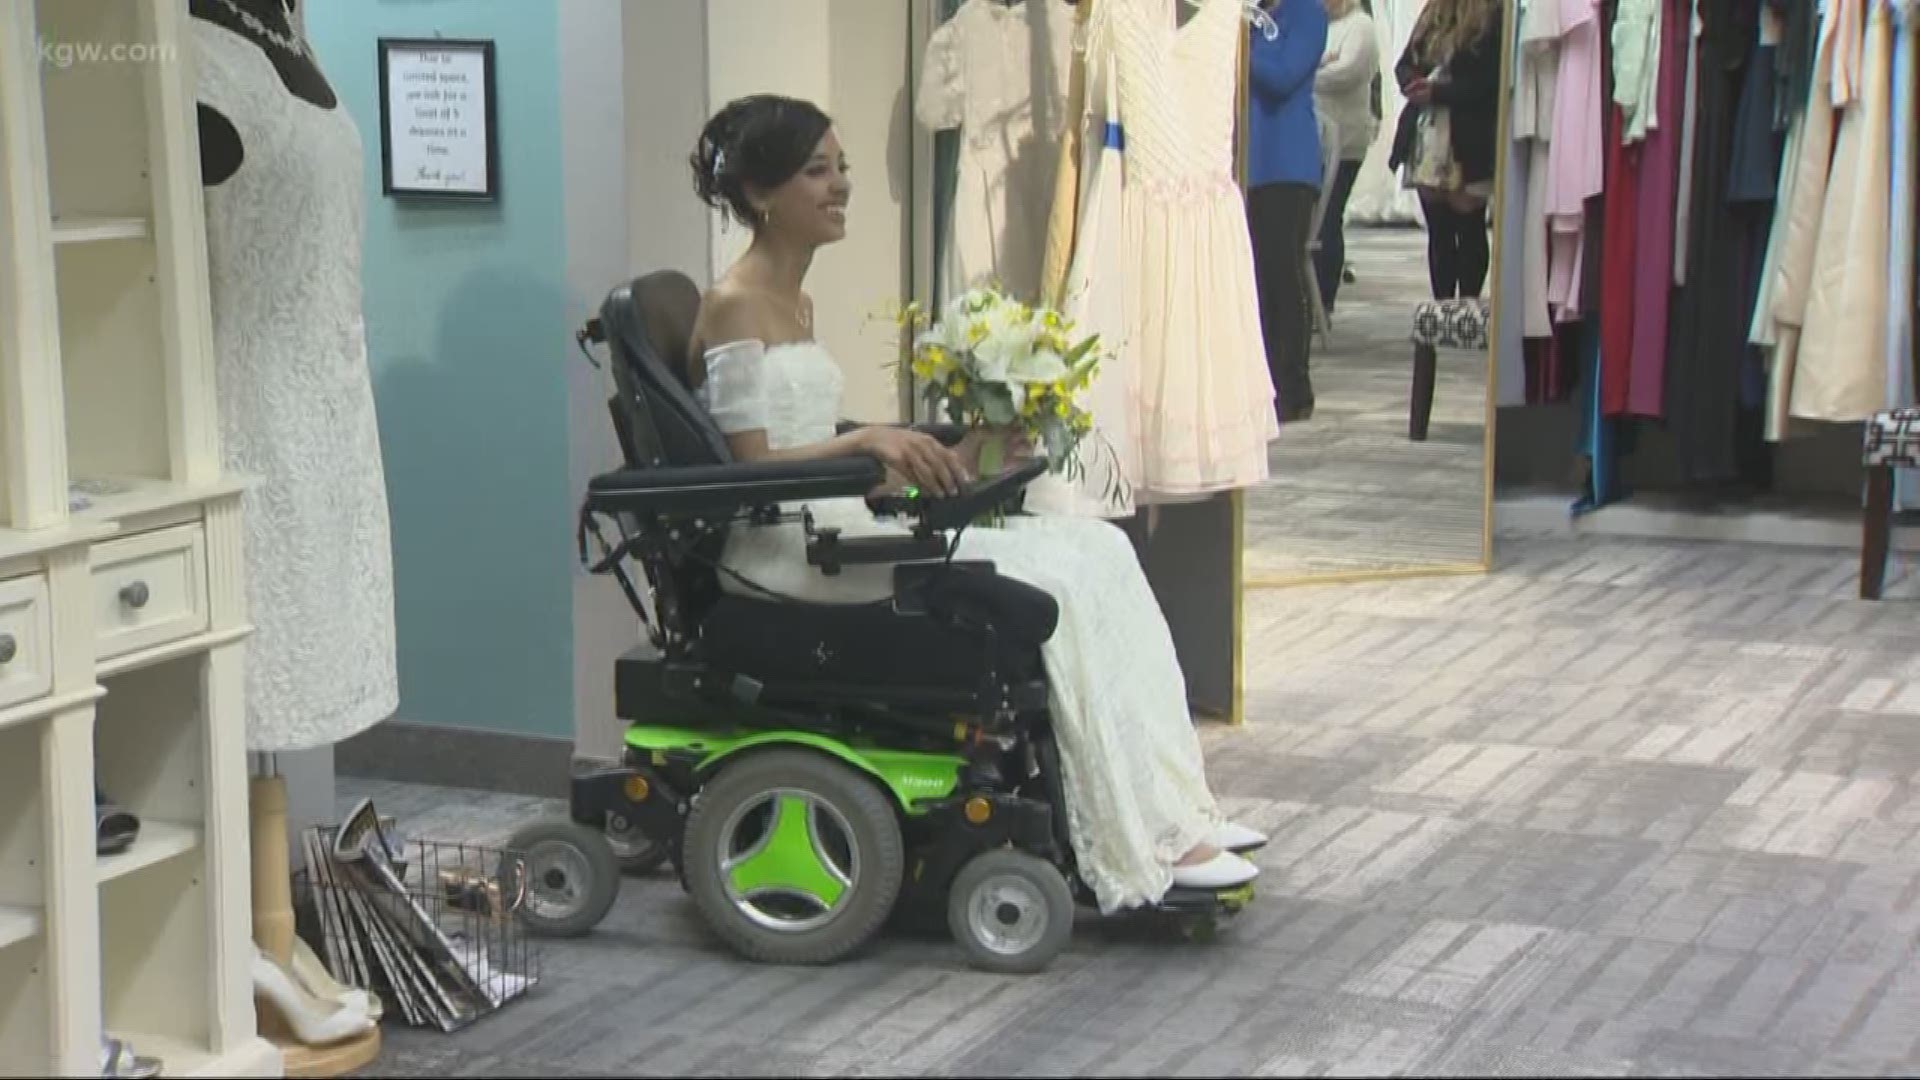 Kenna Hoffstadt, 20, of Sherwood, Oregon, is paralyzed from the waist down after a car crash in 2016. She also suffers from a bone infection that will ultimately take her life. On Sunday, she was able to fulfill a lifelong dream, saying yes to her dream w